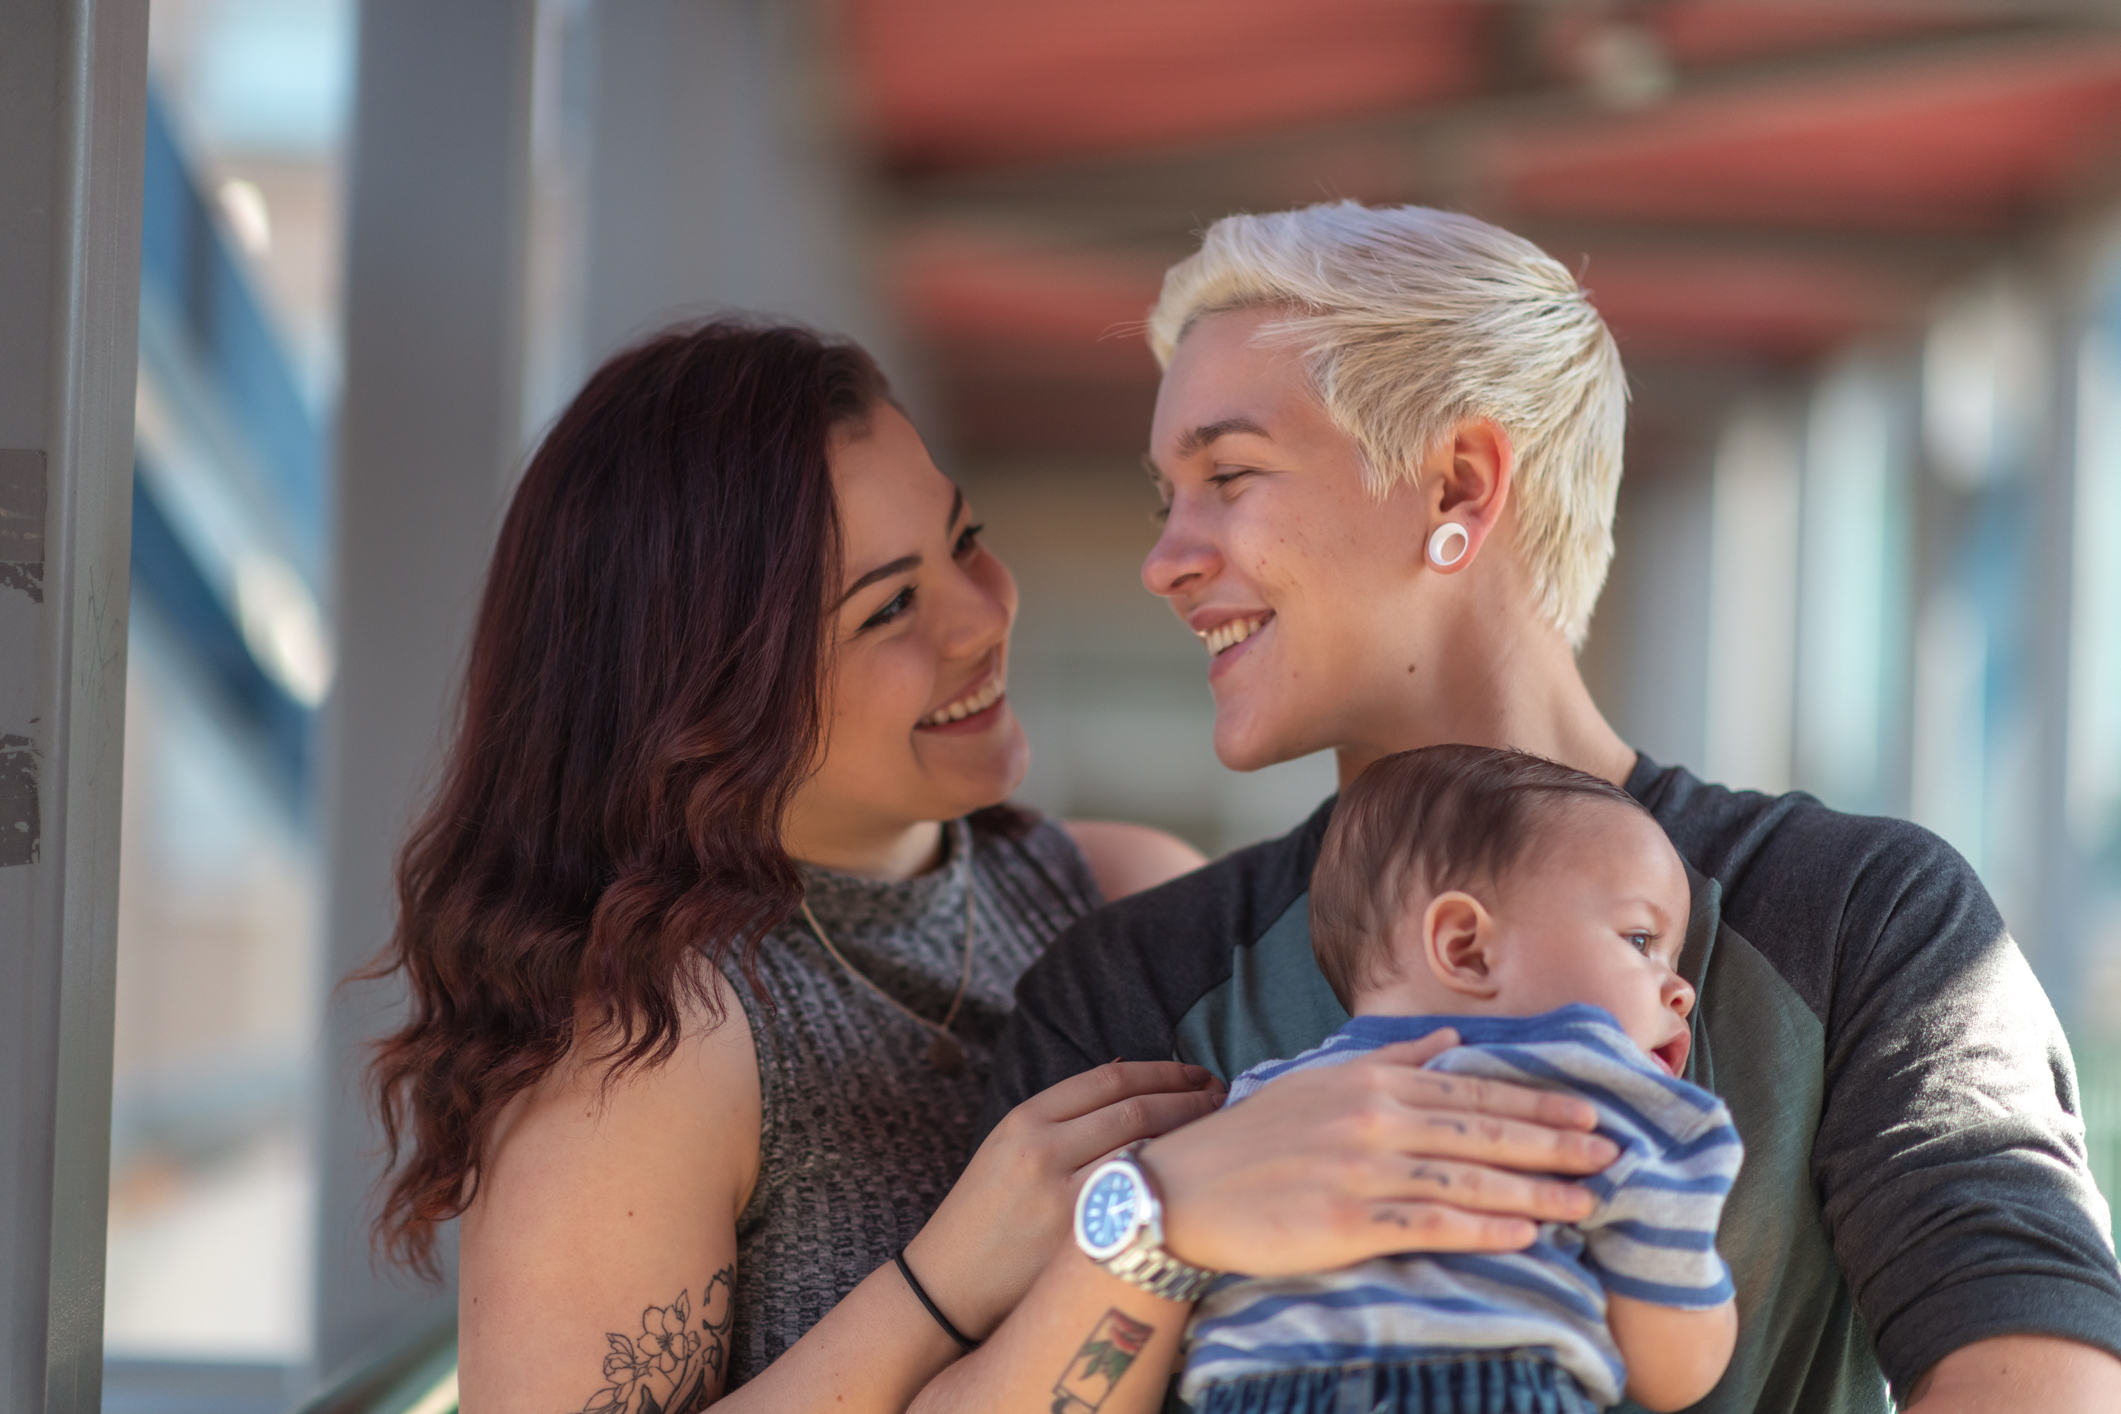 Transgender couple smiles at each other while holding baby